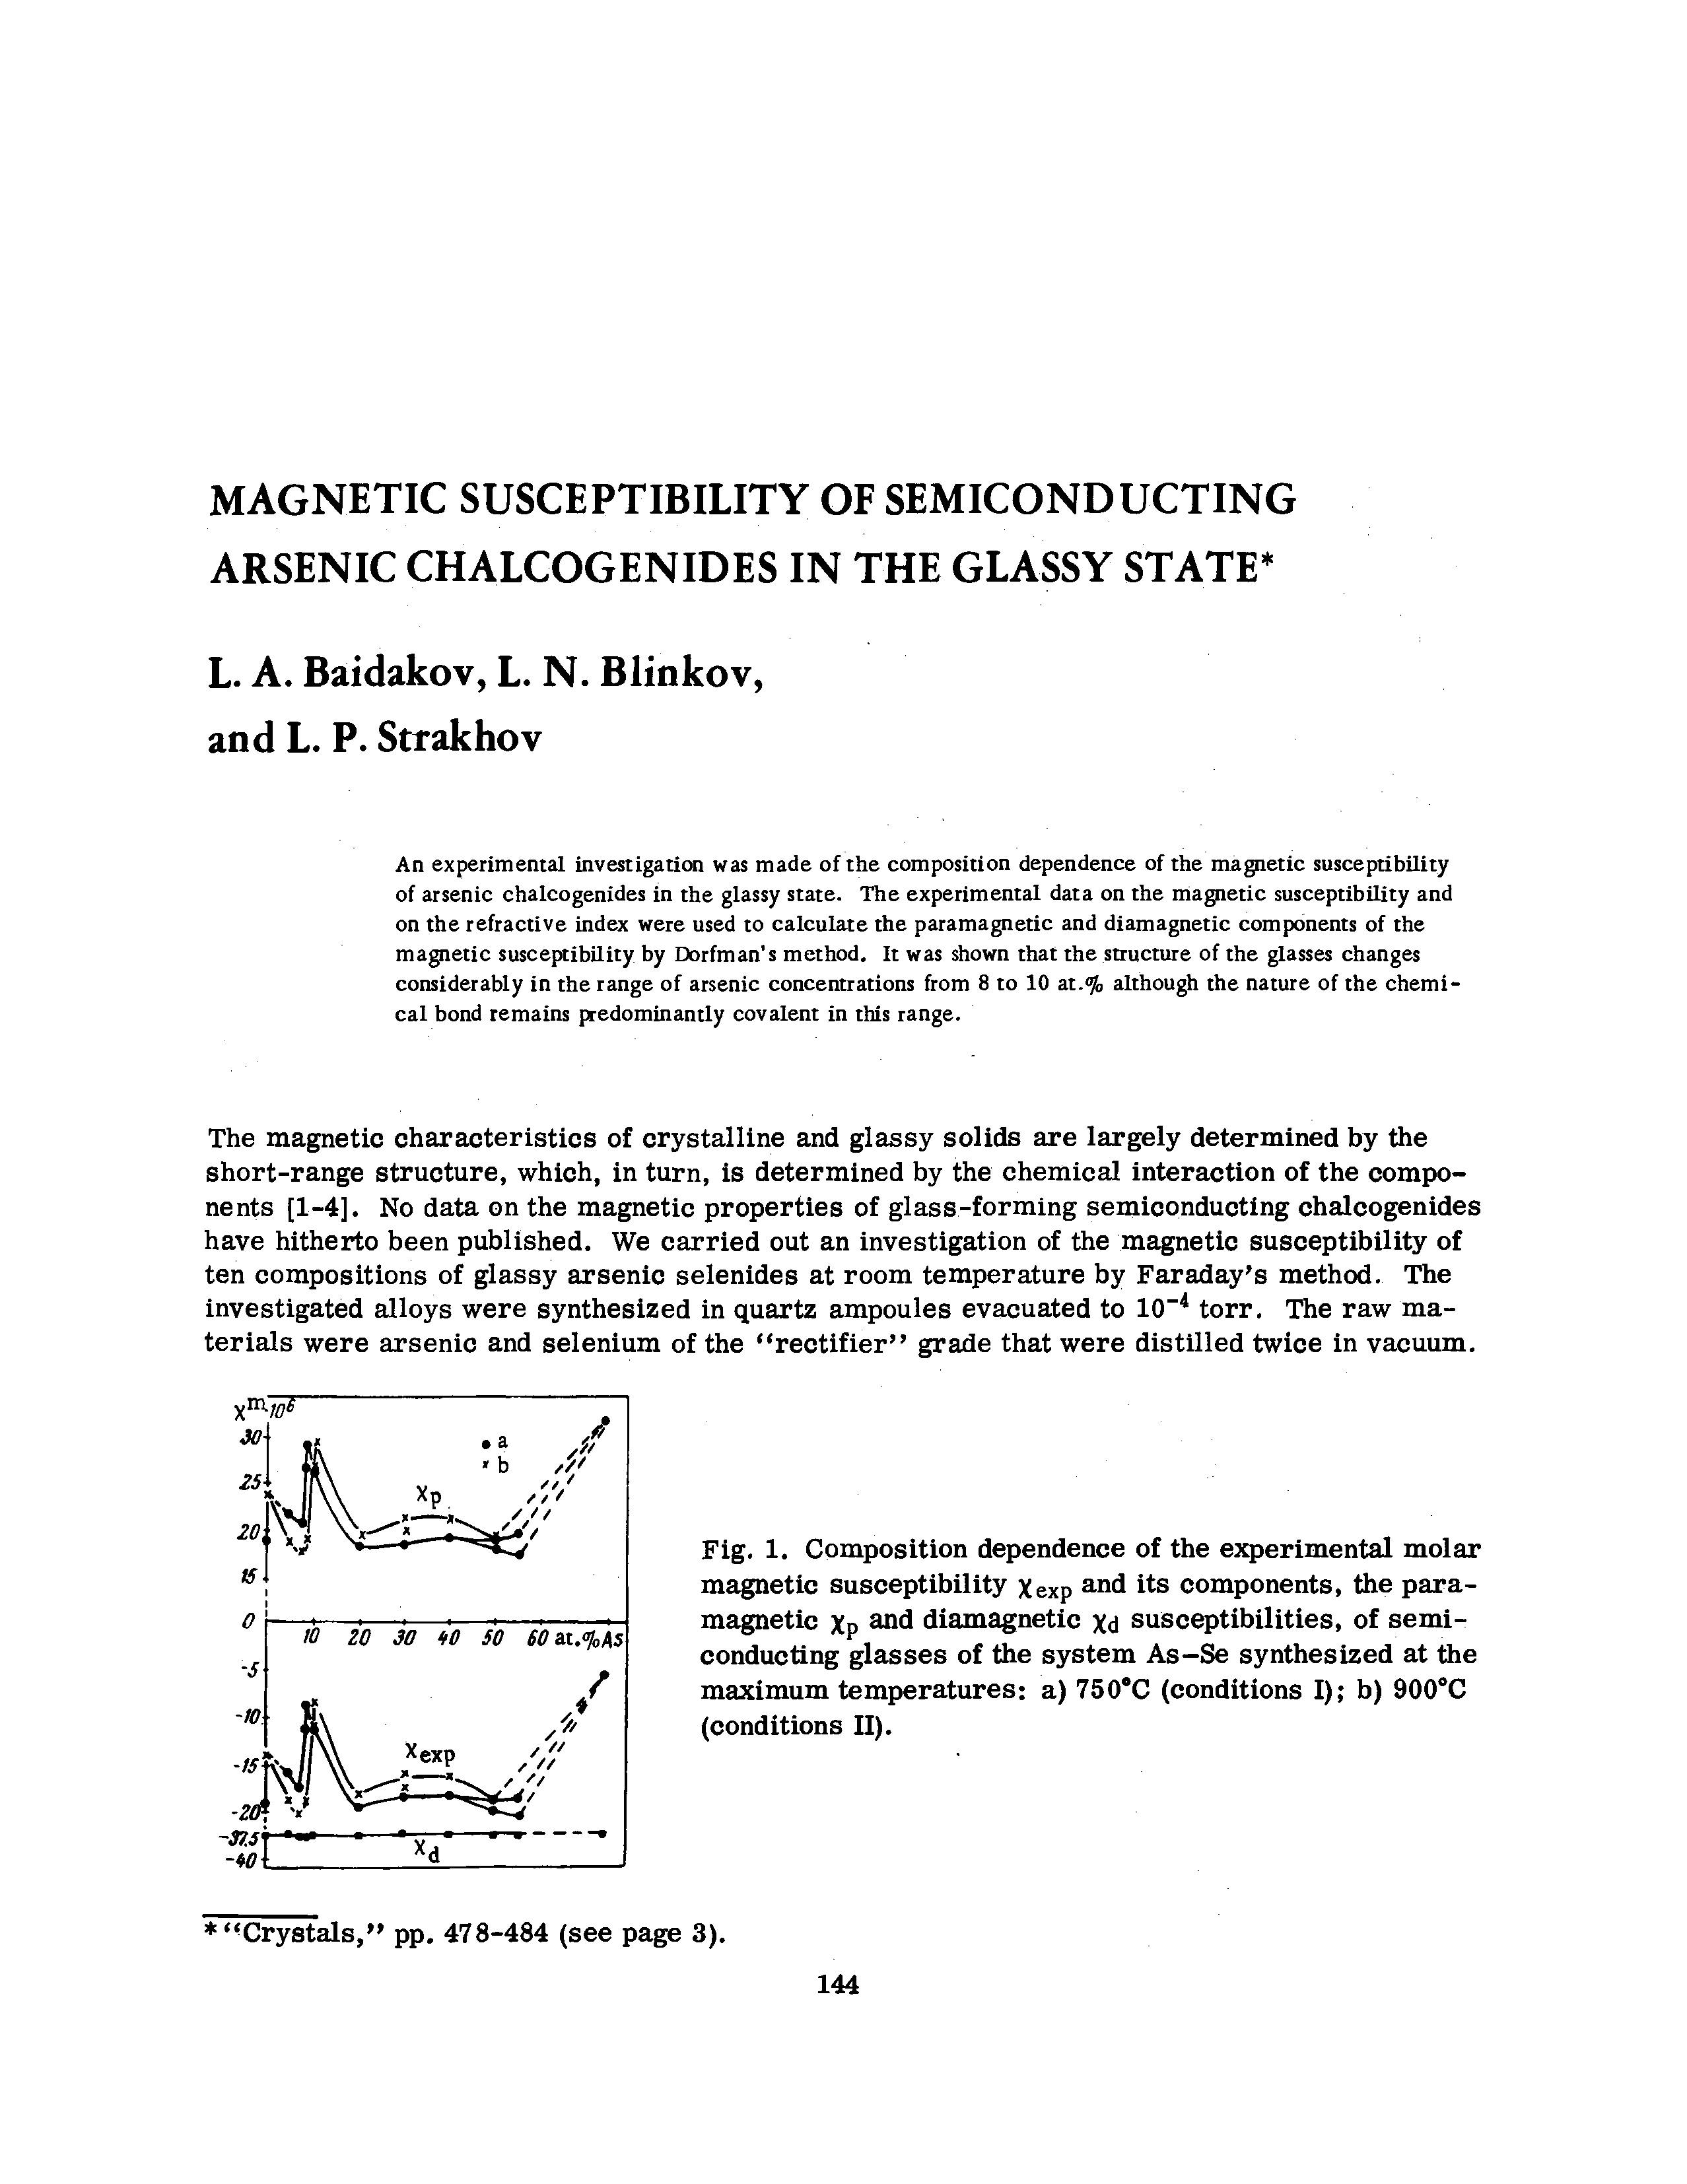 Fig. 1. Composition dependence of the experimental molar magnetic susceptibility Xexp and its components, the paramagnetic Xp and diamagnetic Xd susceptibilities, of semiconducting glasses of the system As-Se synthesized at the maximum temperatures a) 750 C (conditions I) b) 900 C (conditions II).